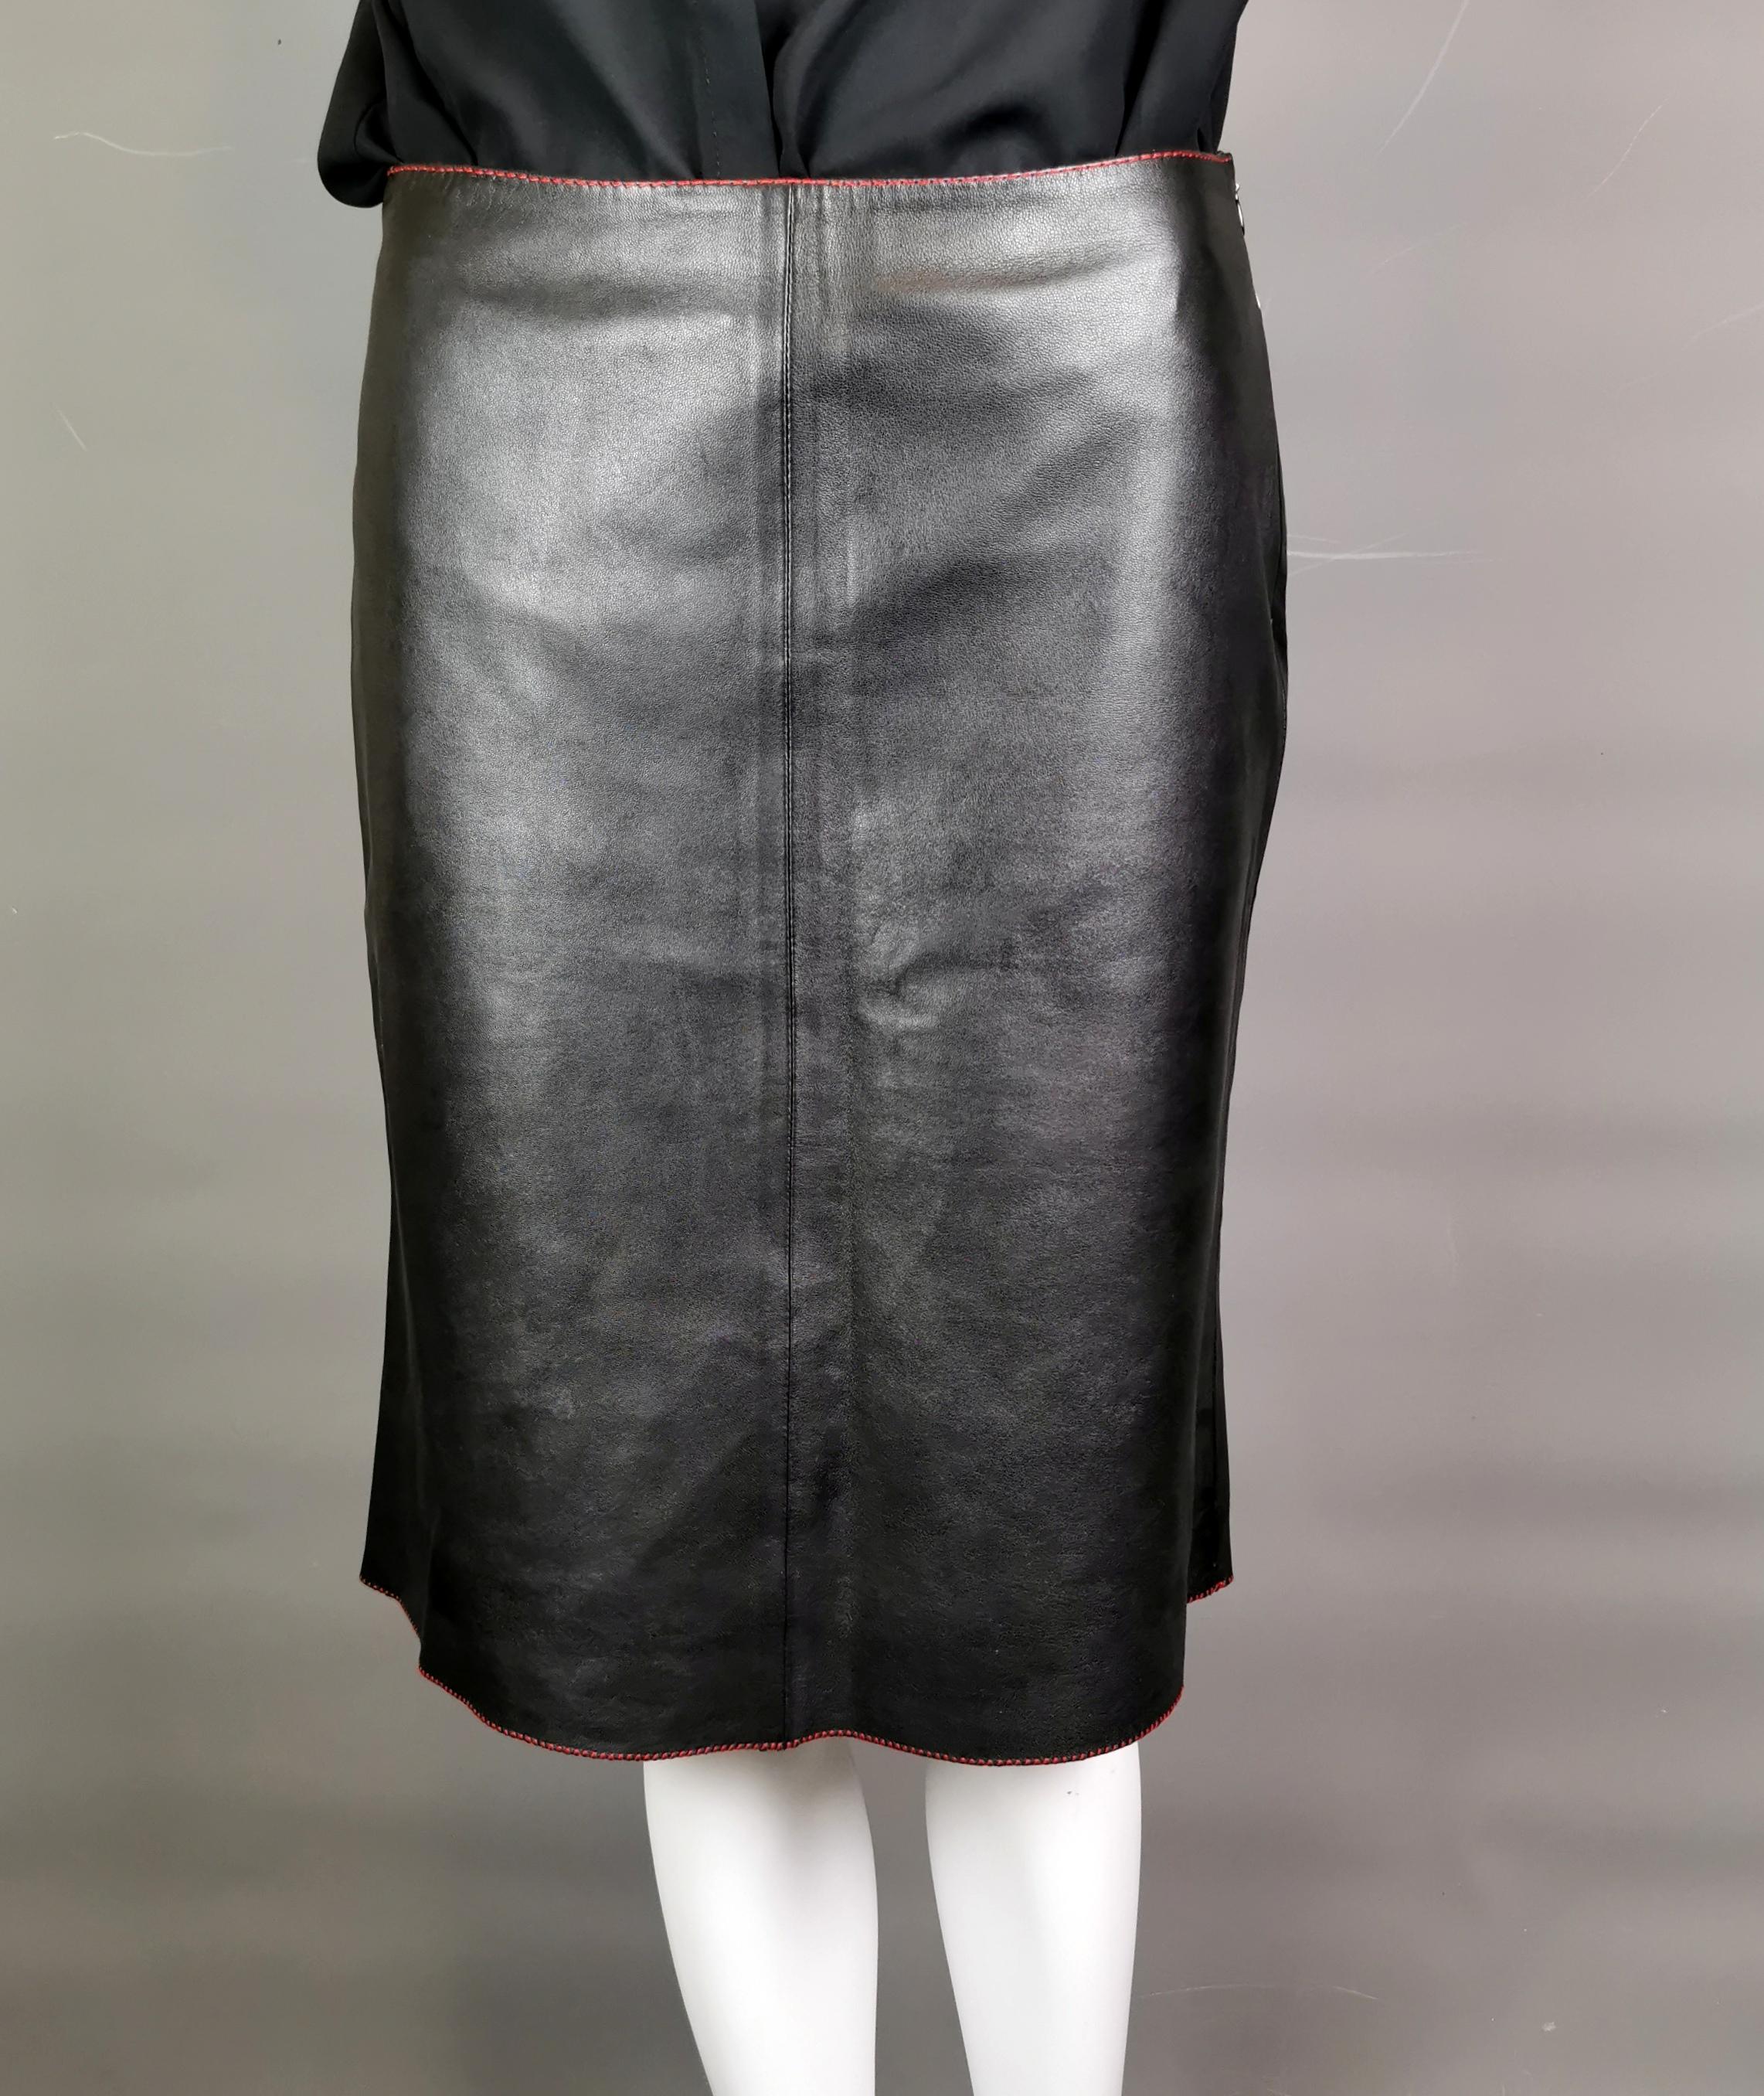 A good quality leather skirt is a true wardrobe staple.

This Miu Miu contrast leather midi skirt is a great choice!

It is a straight shape with a slight flare to the bottom, the skirt has lovely contrast red stitching and a cream leather band at